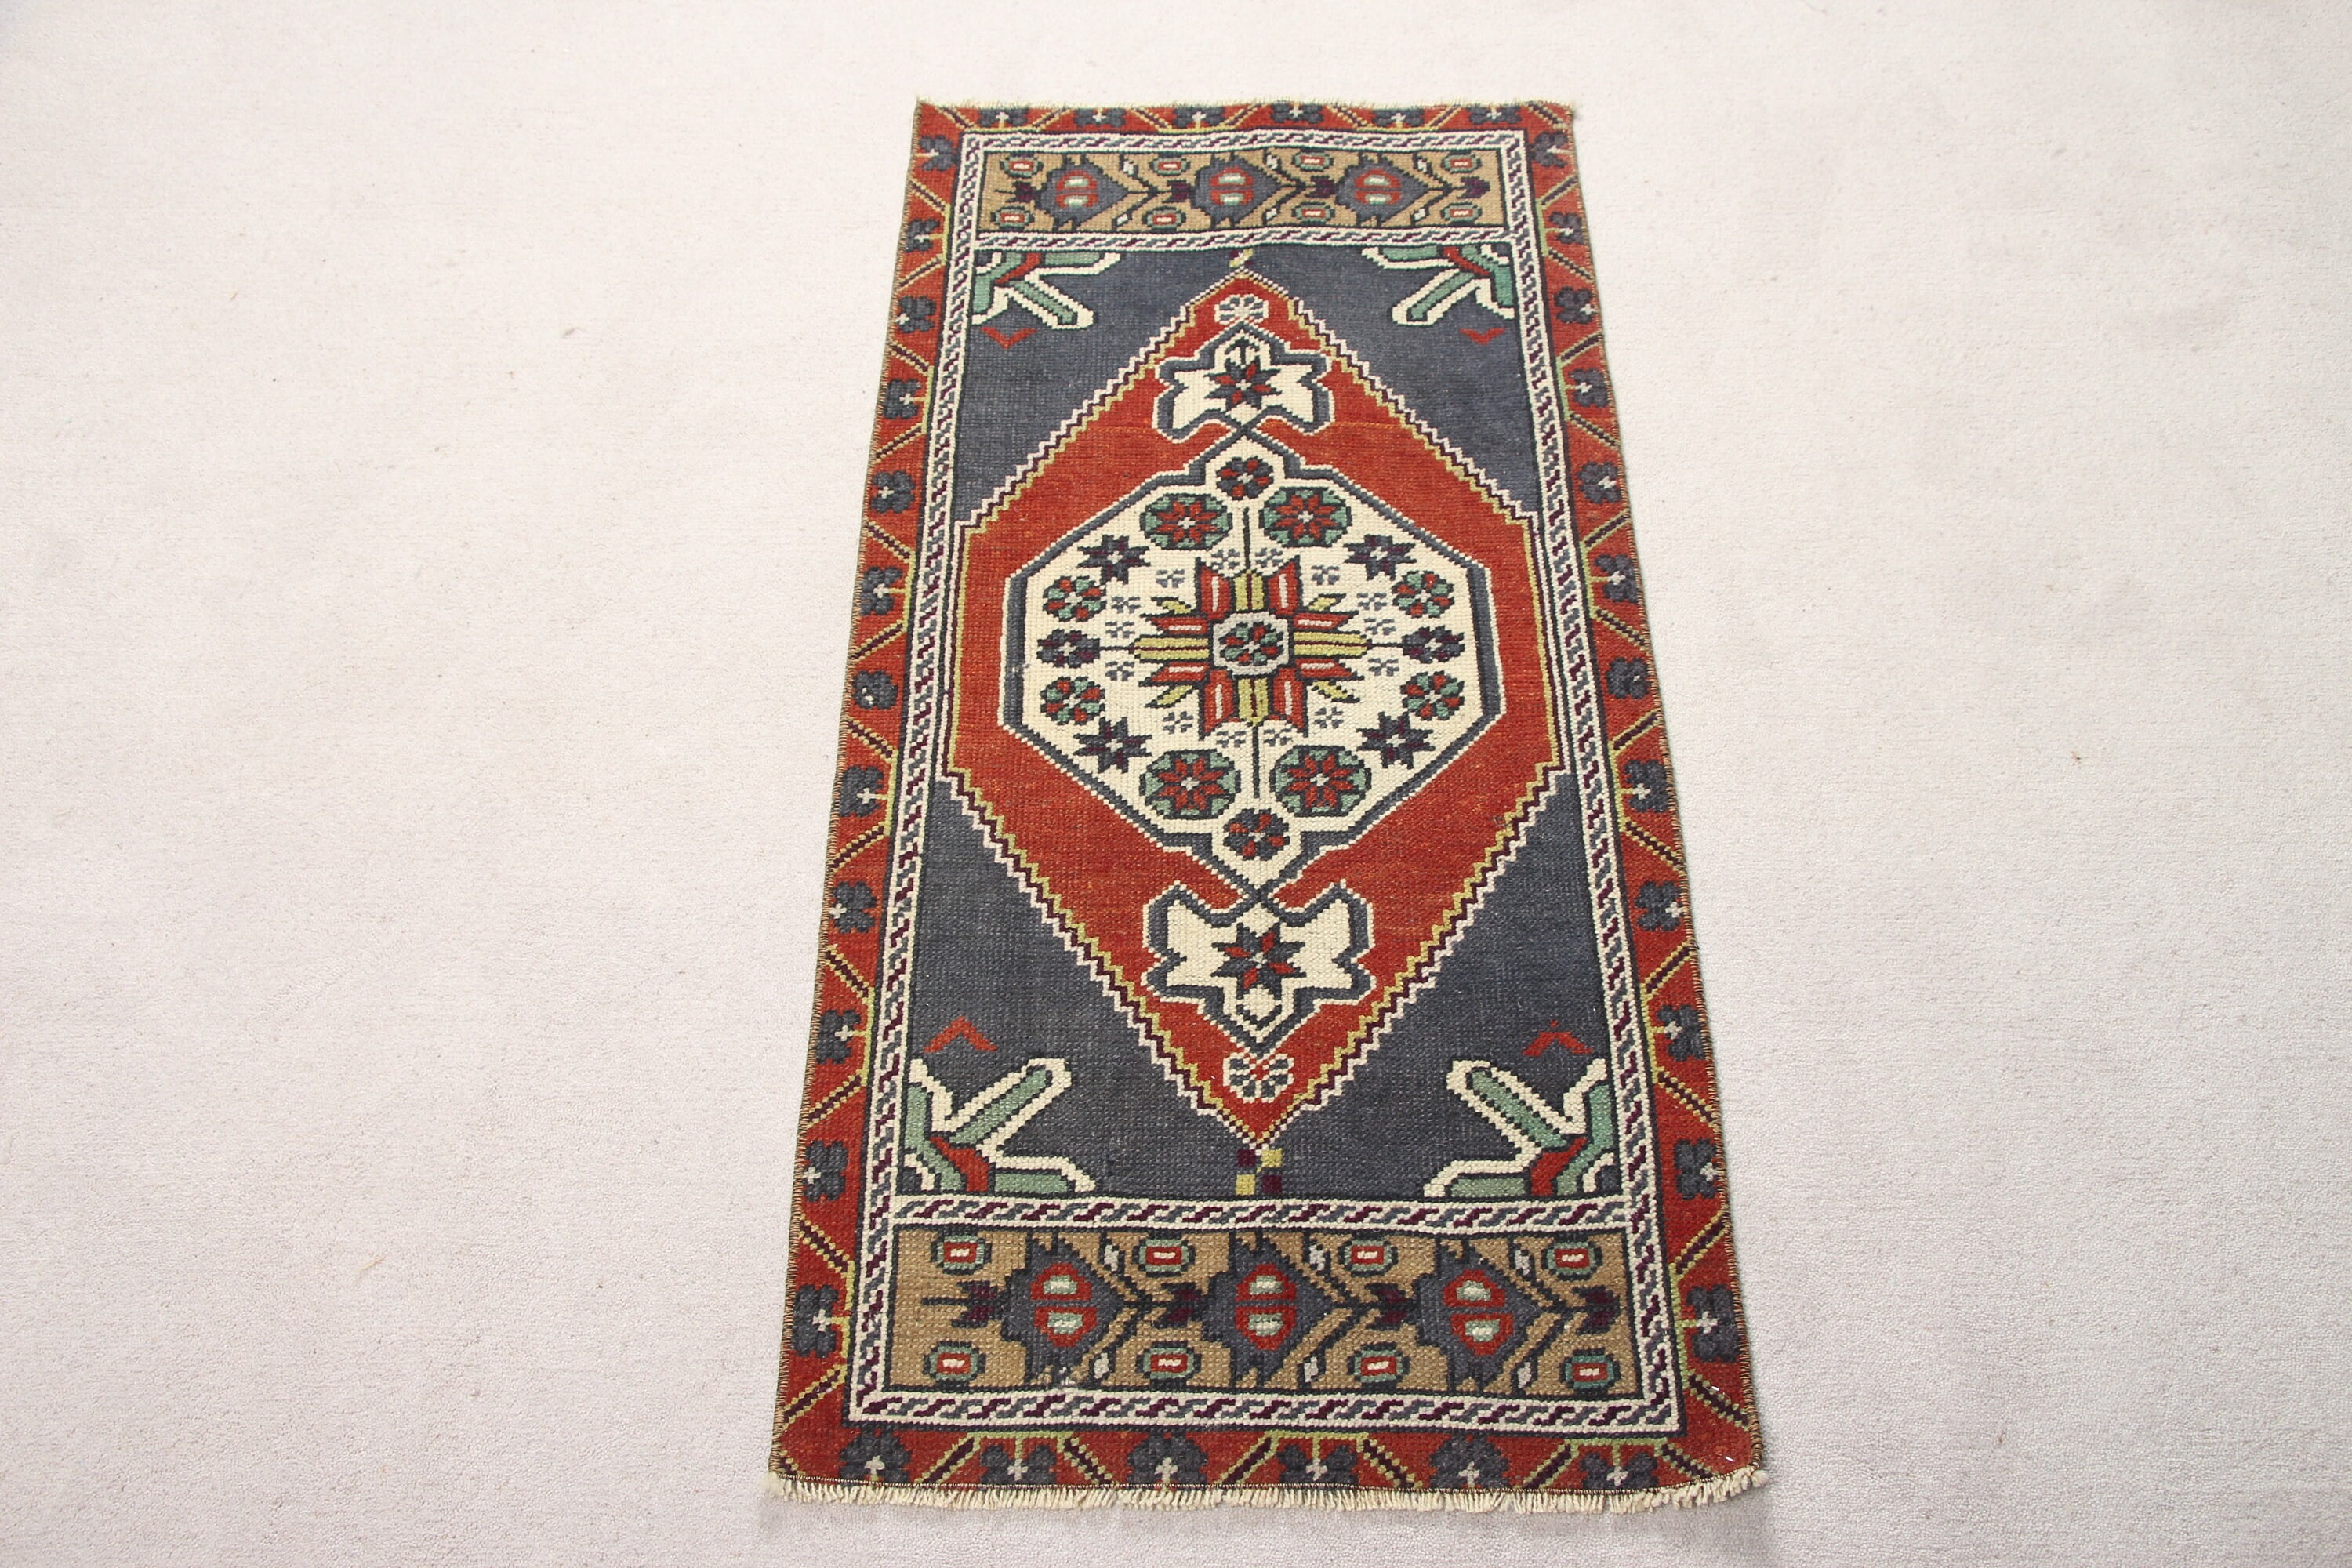 Brown Oushak Rug, Kitchen Rug, Moroccan Rug, Nursery Rugs, Rugs for Entry, Bath Rugs, Turkish Rug, Vintage Rugs, 1.7x3.5 ft Small Rugs